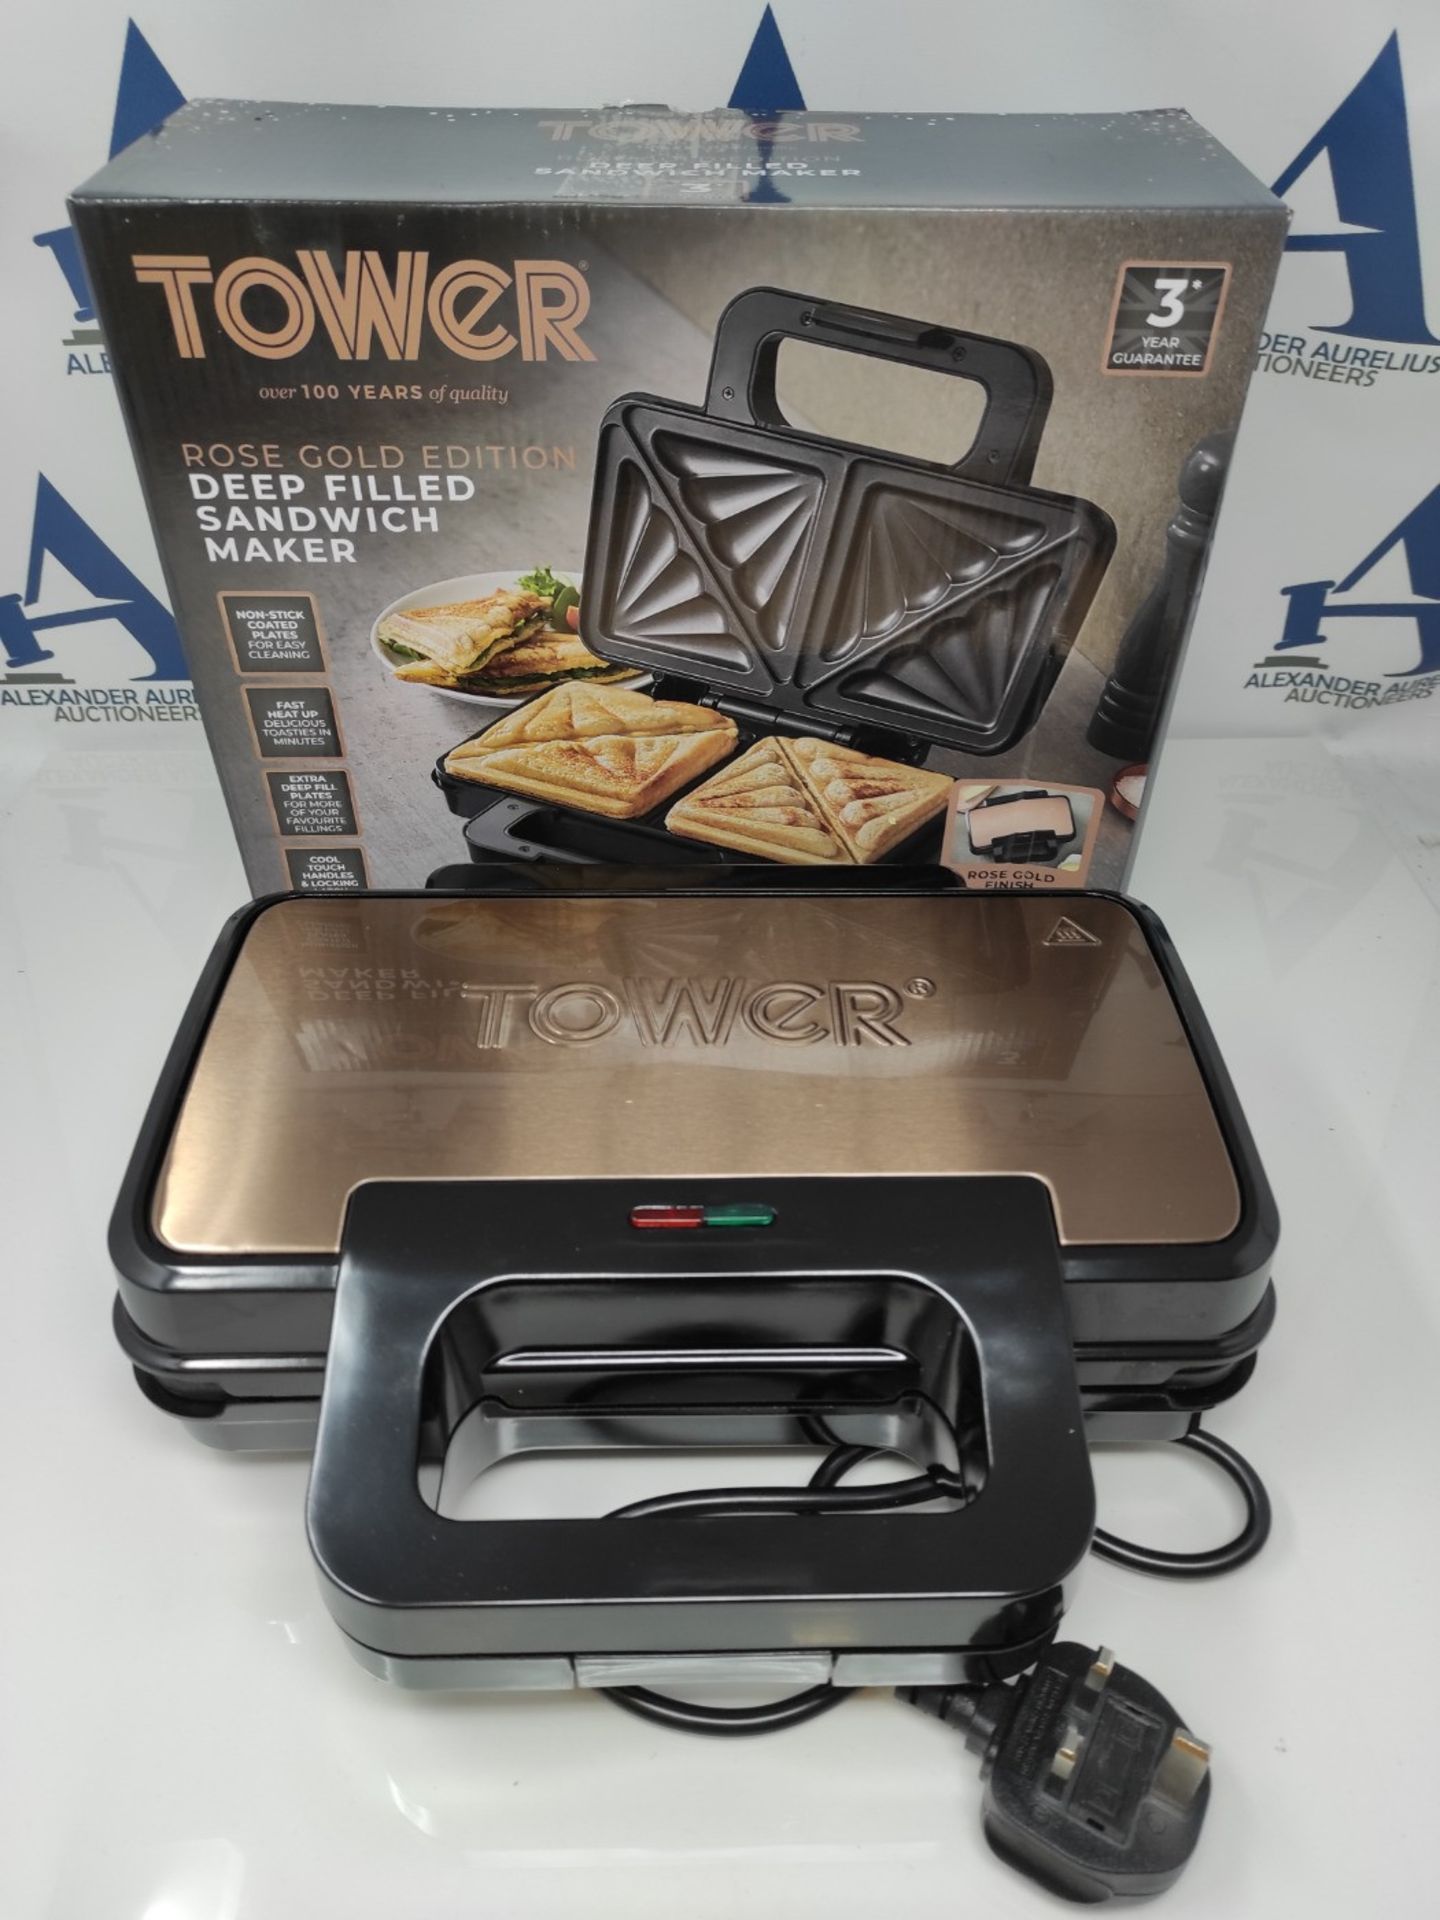 Tower T27031RG Deep Filled Sandwich Maker with Non-Stick Coated Plate and Automatic Te - Image 2 of 3